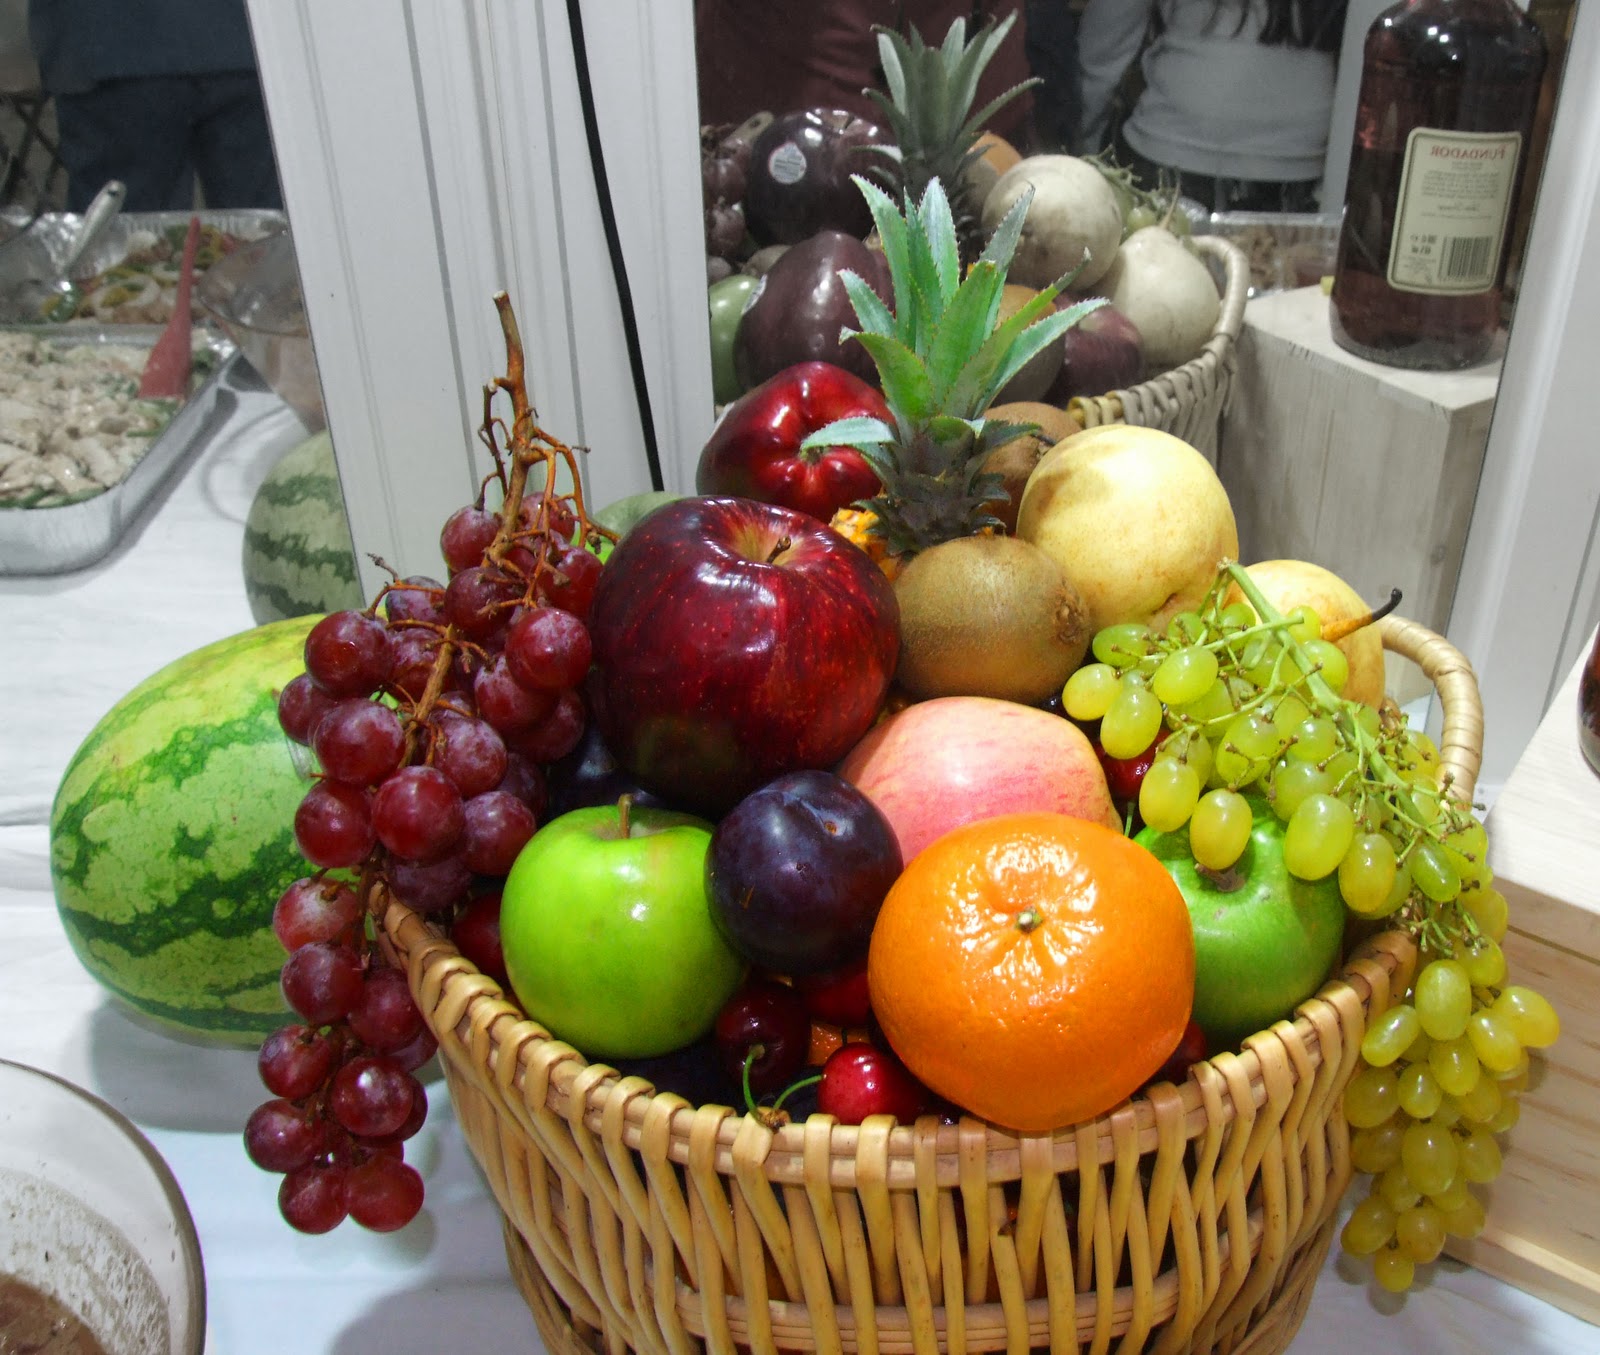 graxa-s-page-13-different-kind-of-fruits-for-the-new-year-celebration